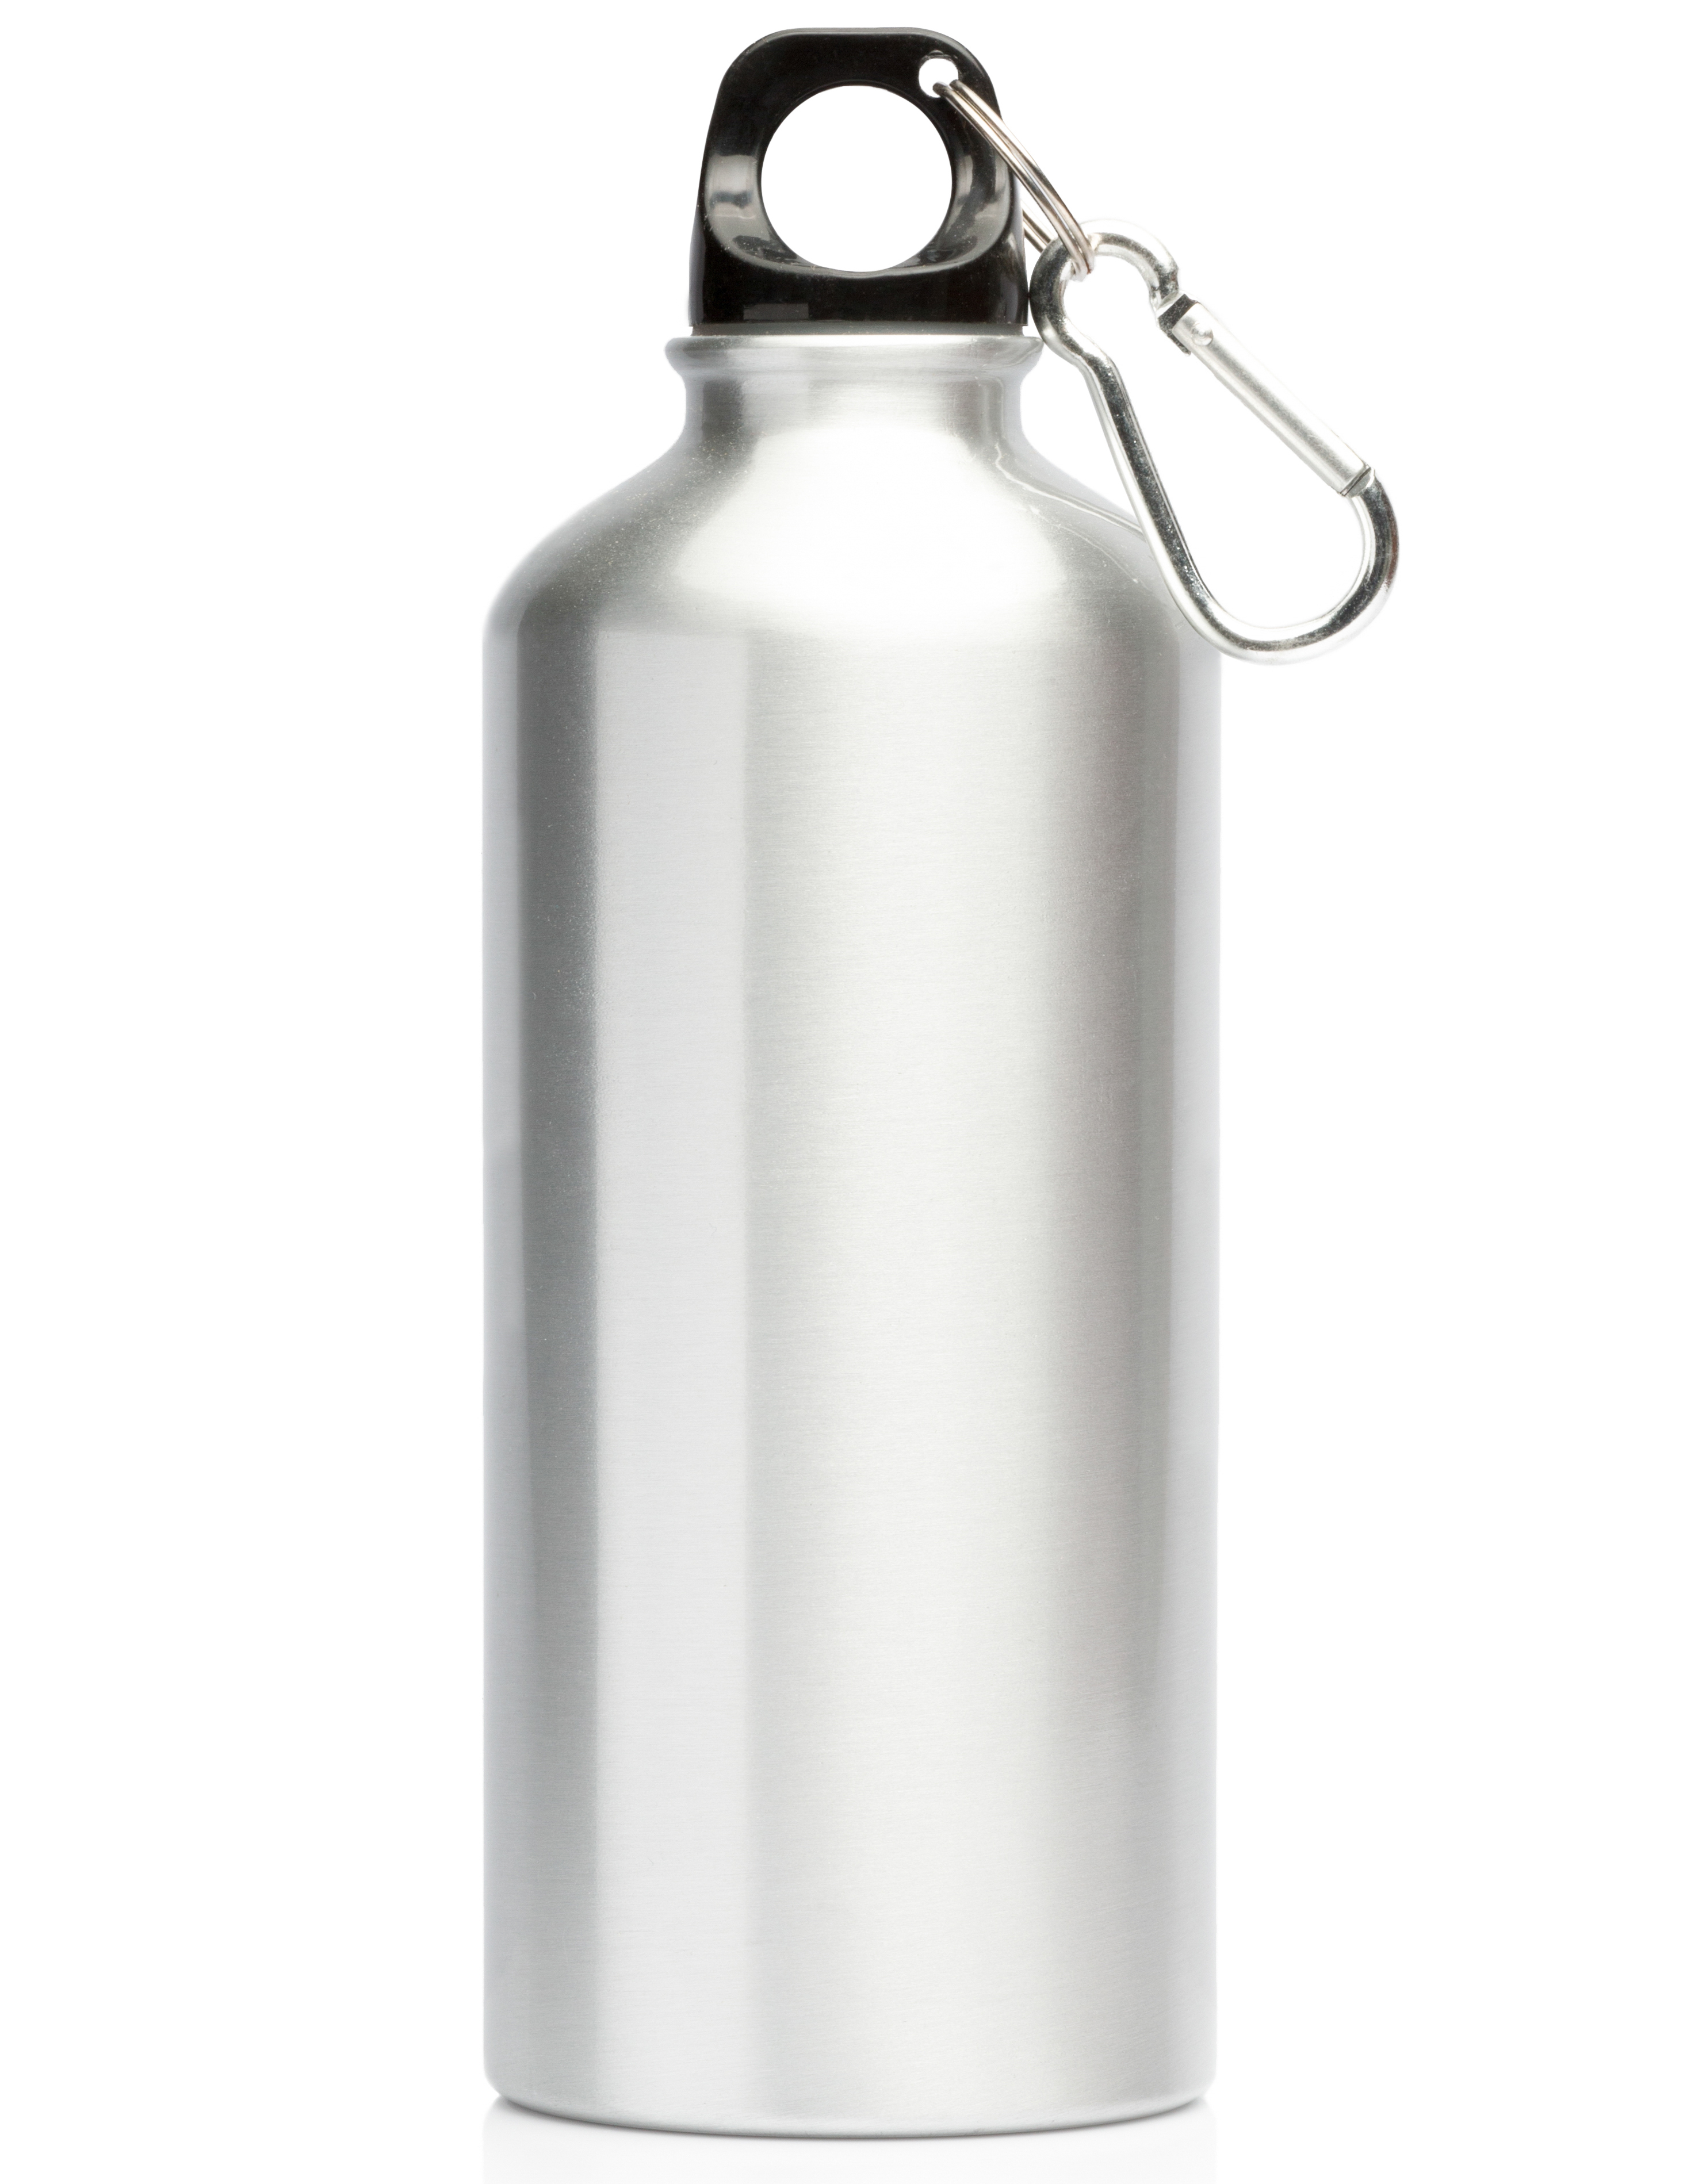 stainless steel water bottle for boating